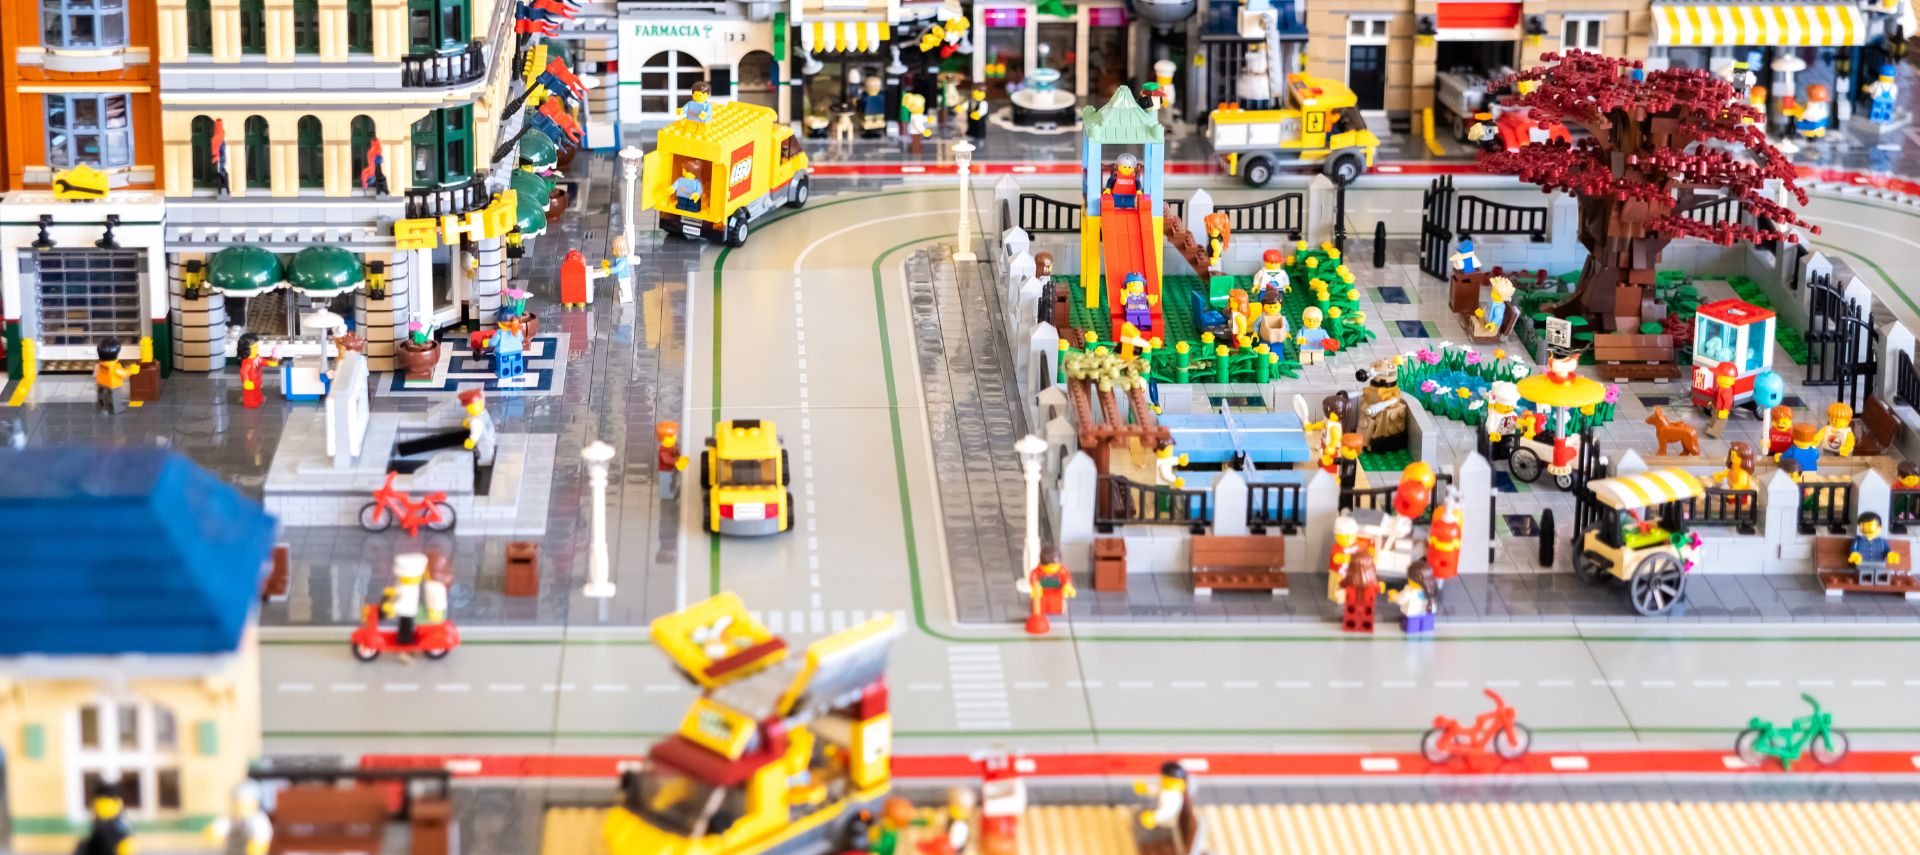 City block built entirely of legos with cars, park, and shops